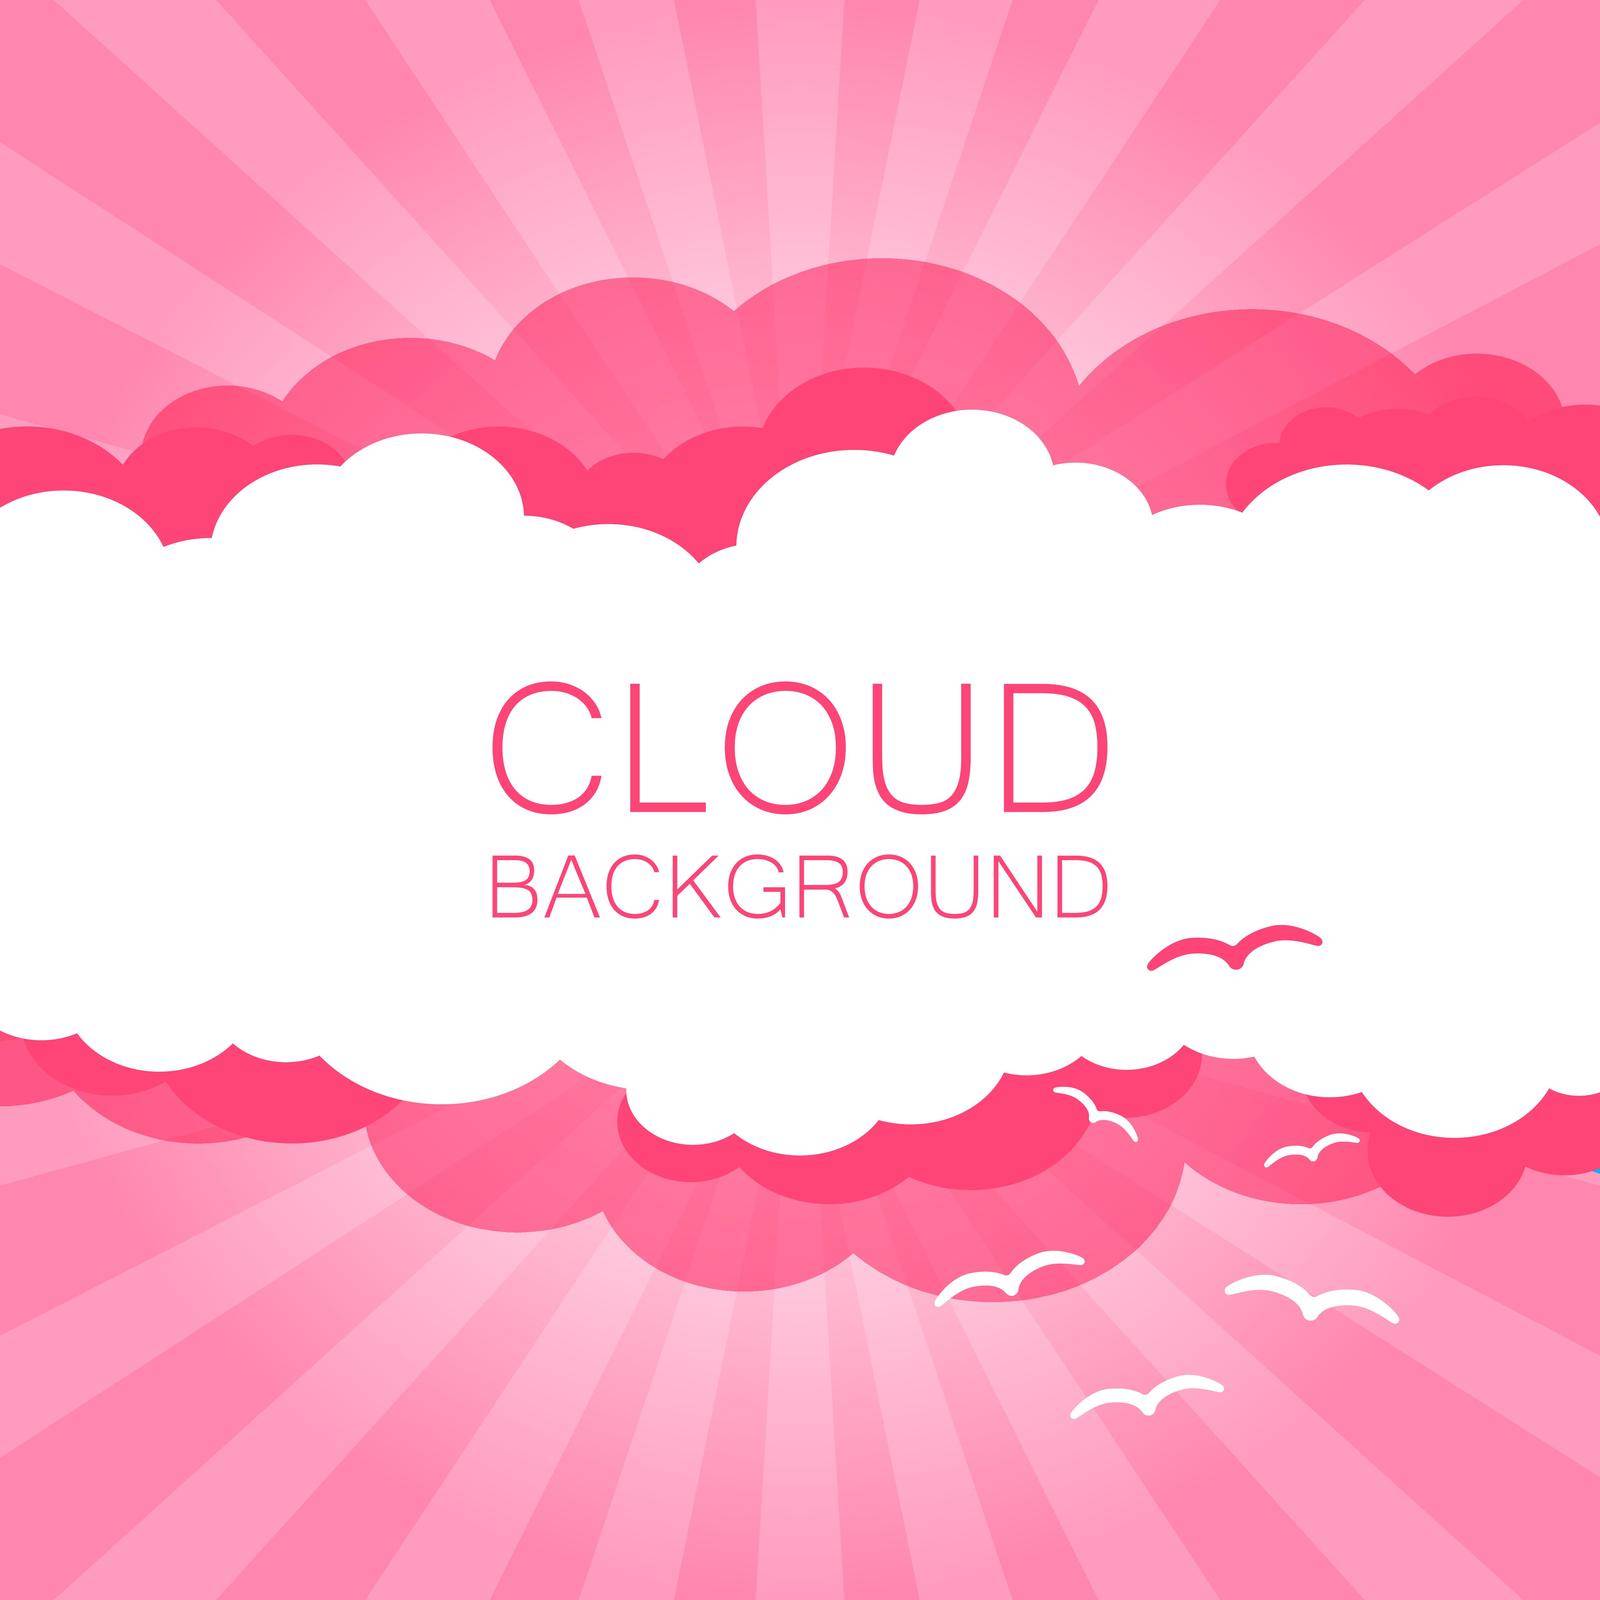 Clouds in the sky with sun rays. Flat vector illustration in cartoon style. Pink colorful sunset background.